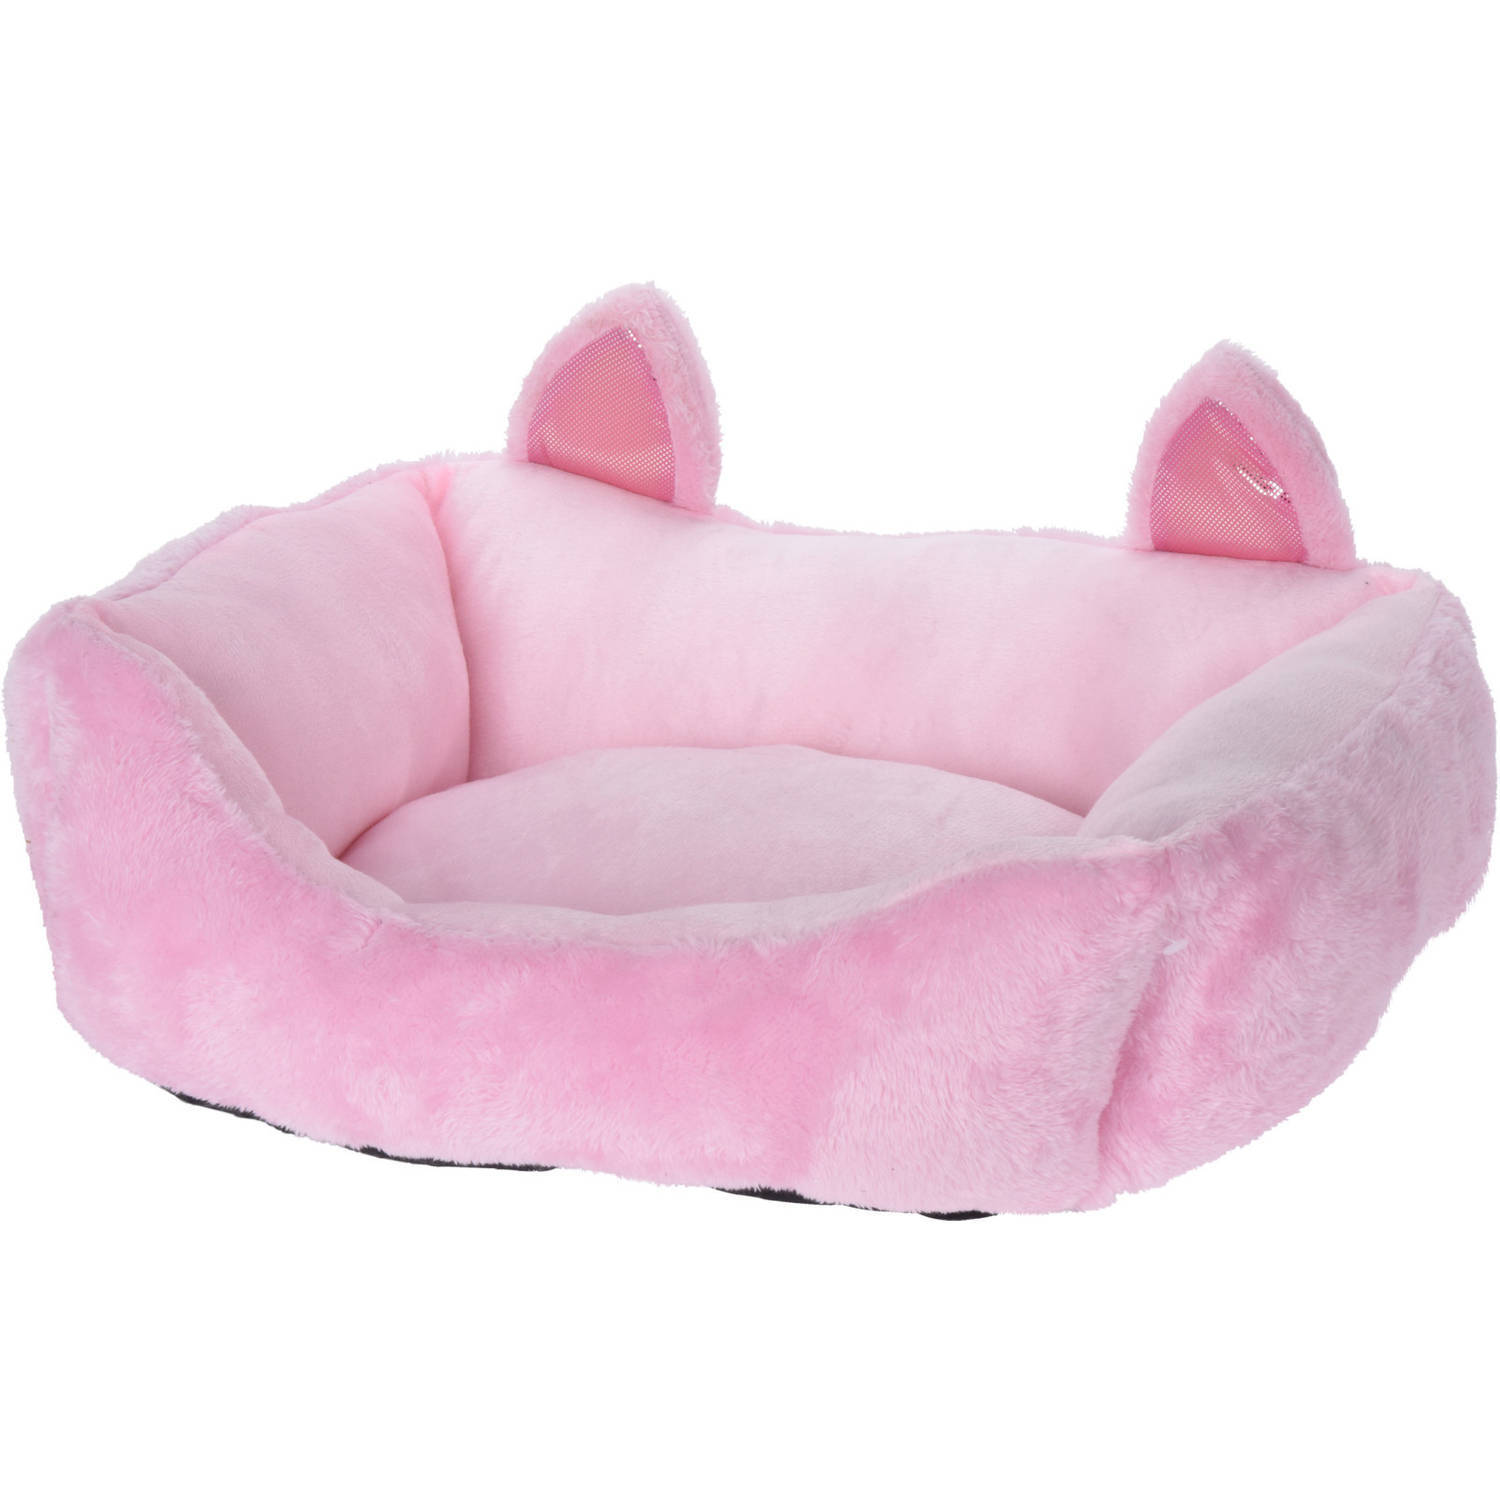 Pets Collection Hondenmand 56 X 46 X 16 Cm Polyester Roze roze